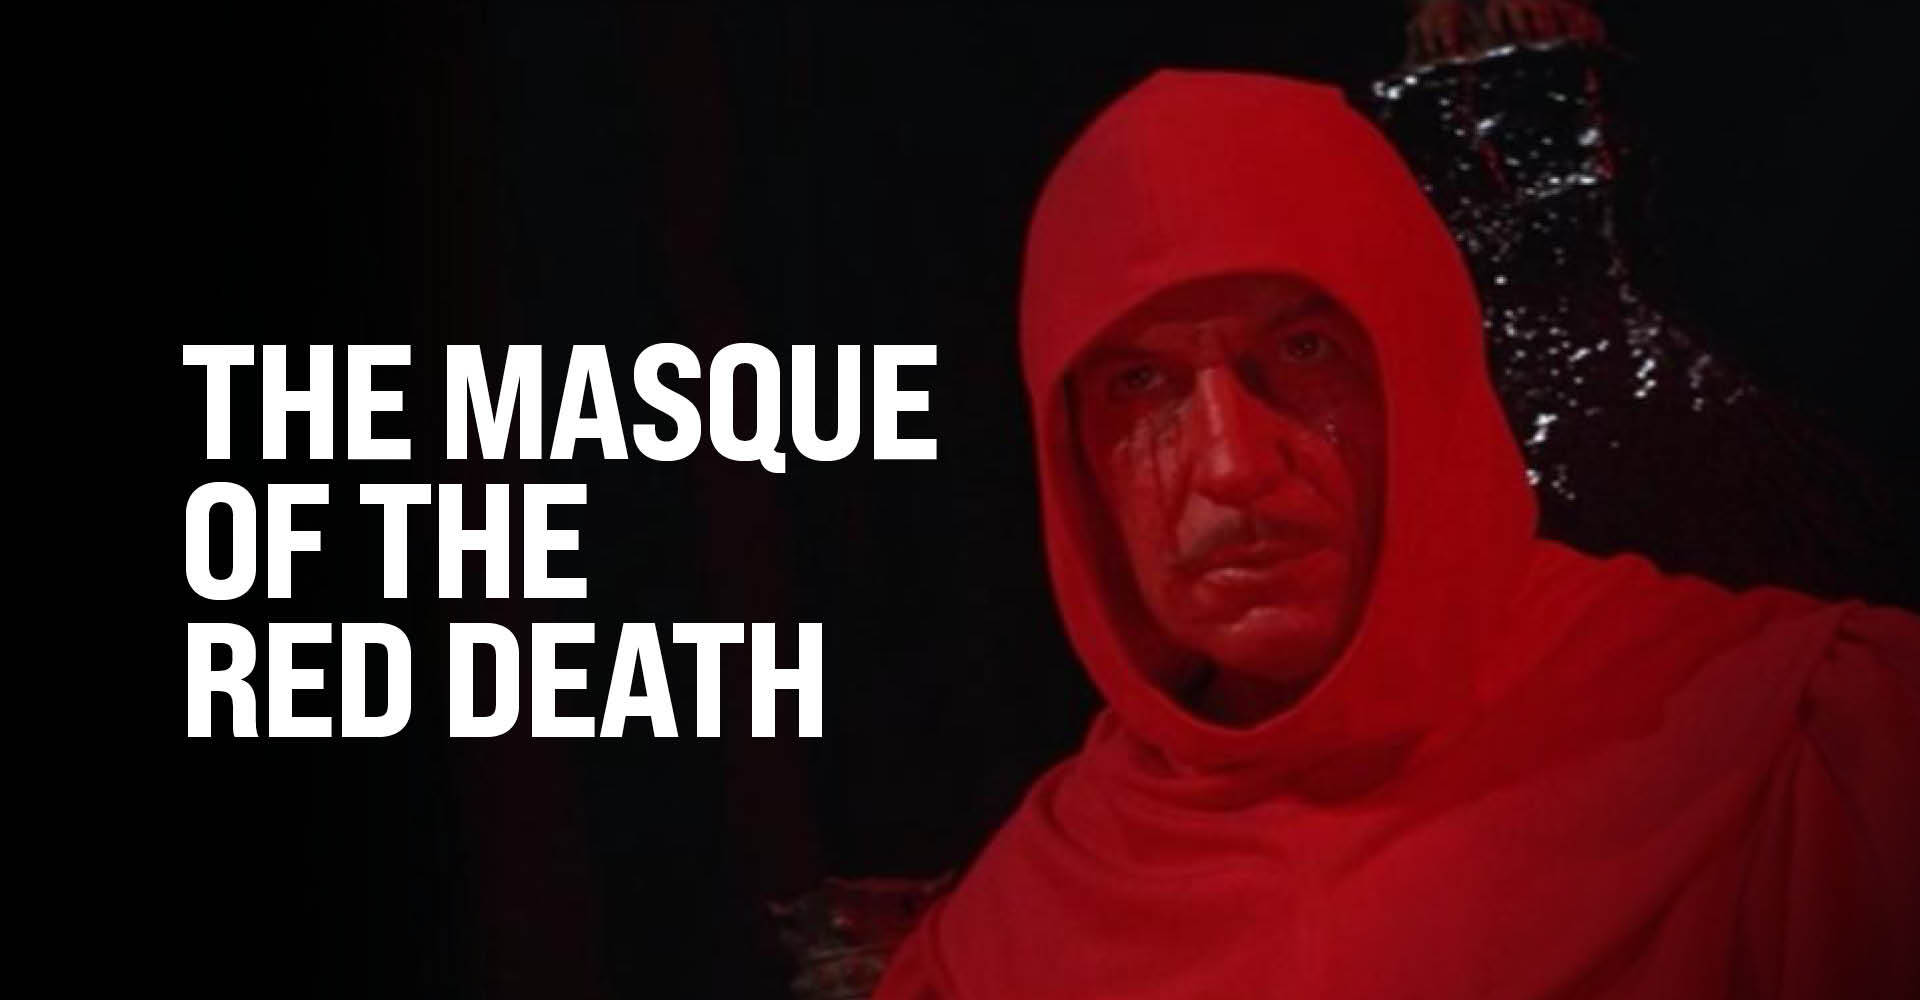 32-facts-about-the-movie-the-masque-of-the-red-death